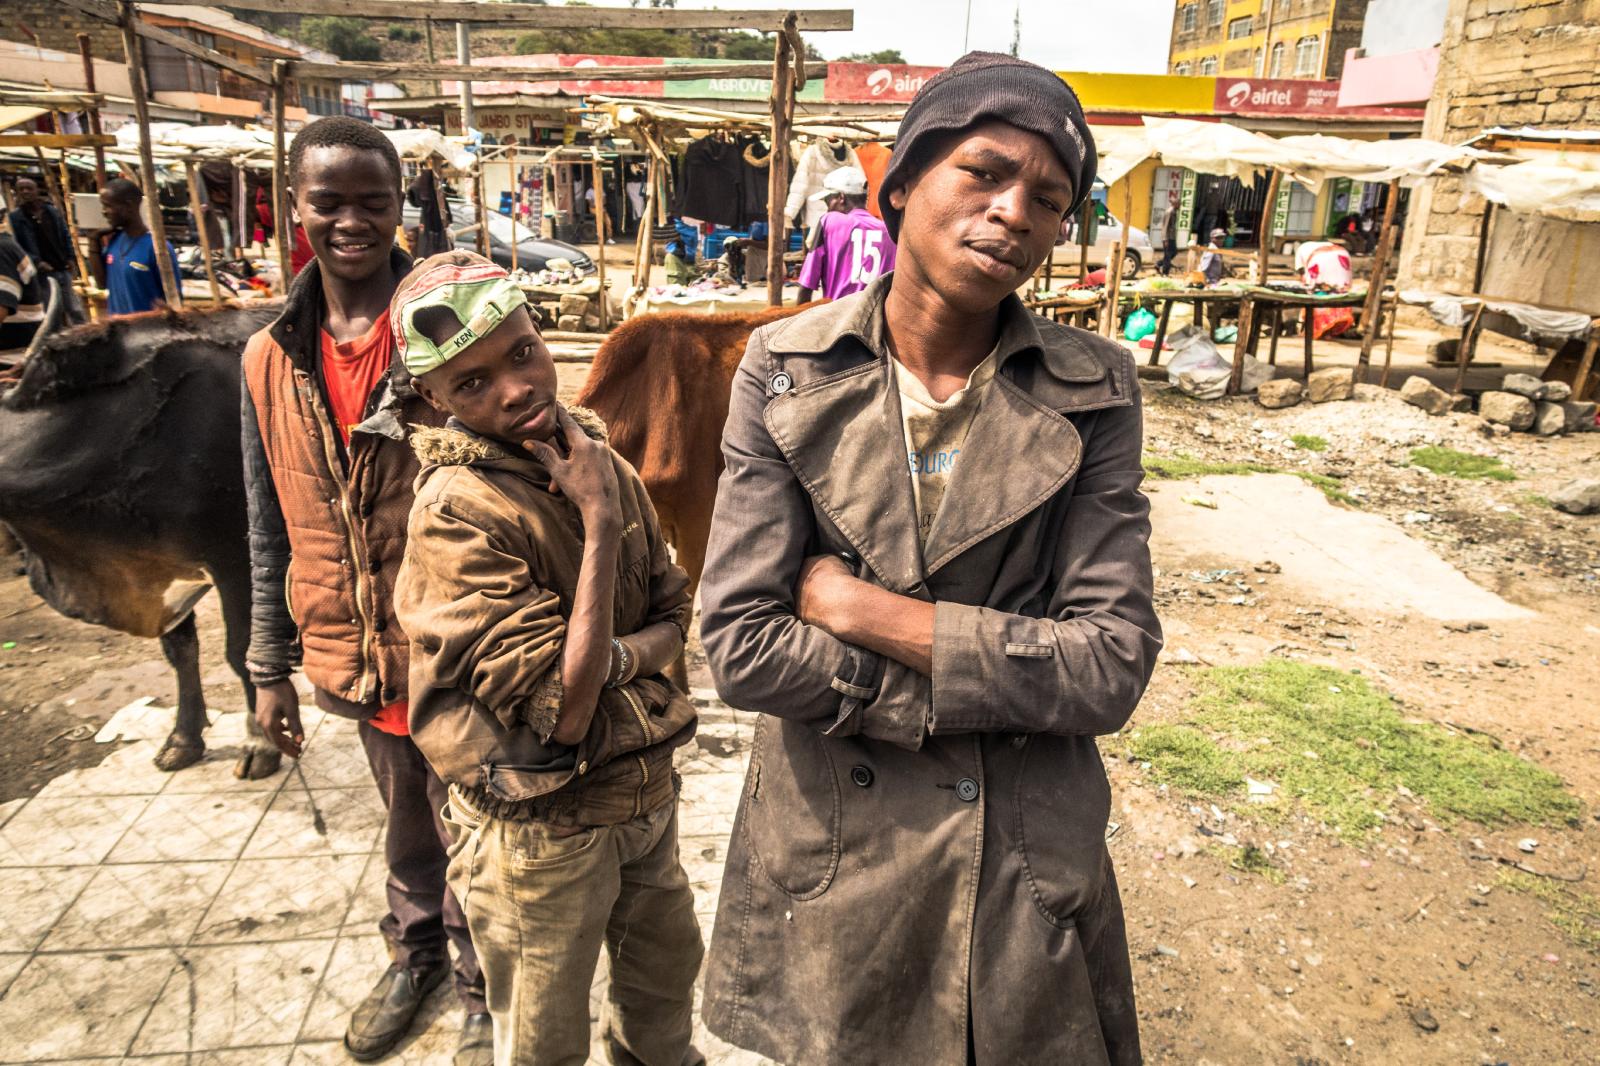 The glue staves off the hunger; street boys of Narok